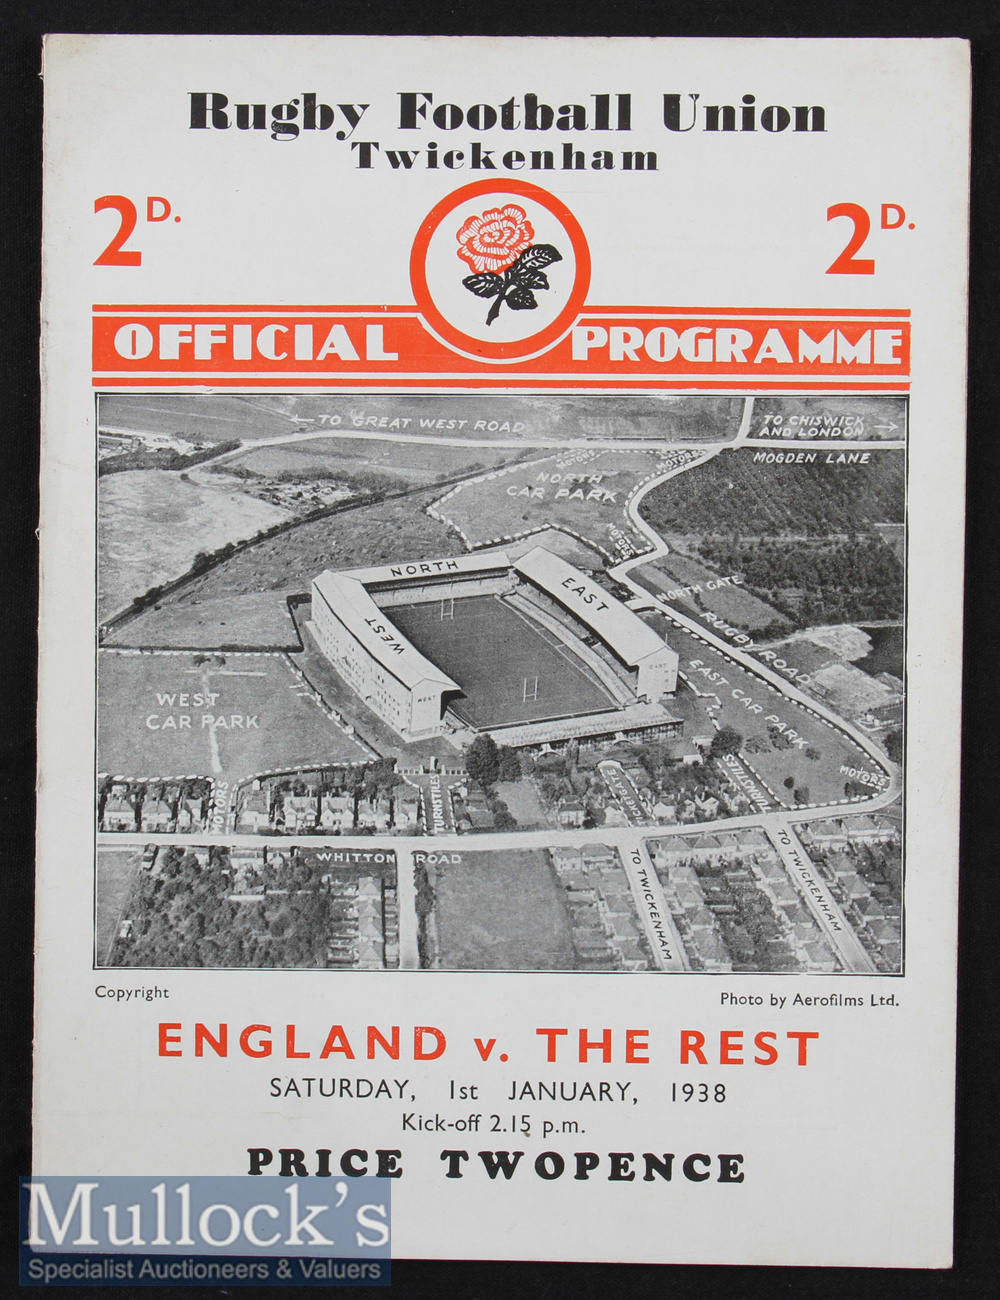 1938 England v The Rest Final Trial Rugby Programme: Lovely clean un-creased 4pp card for this